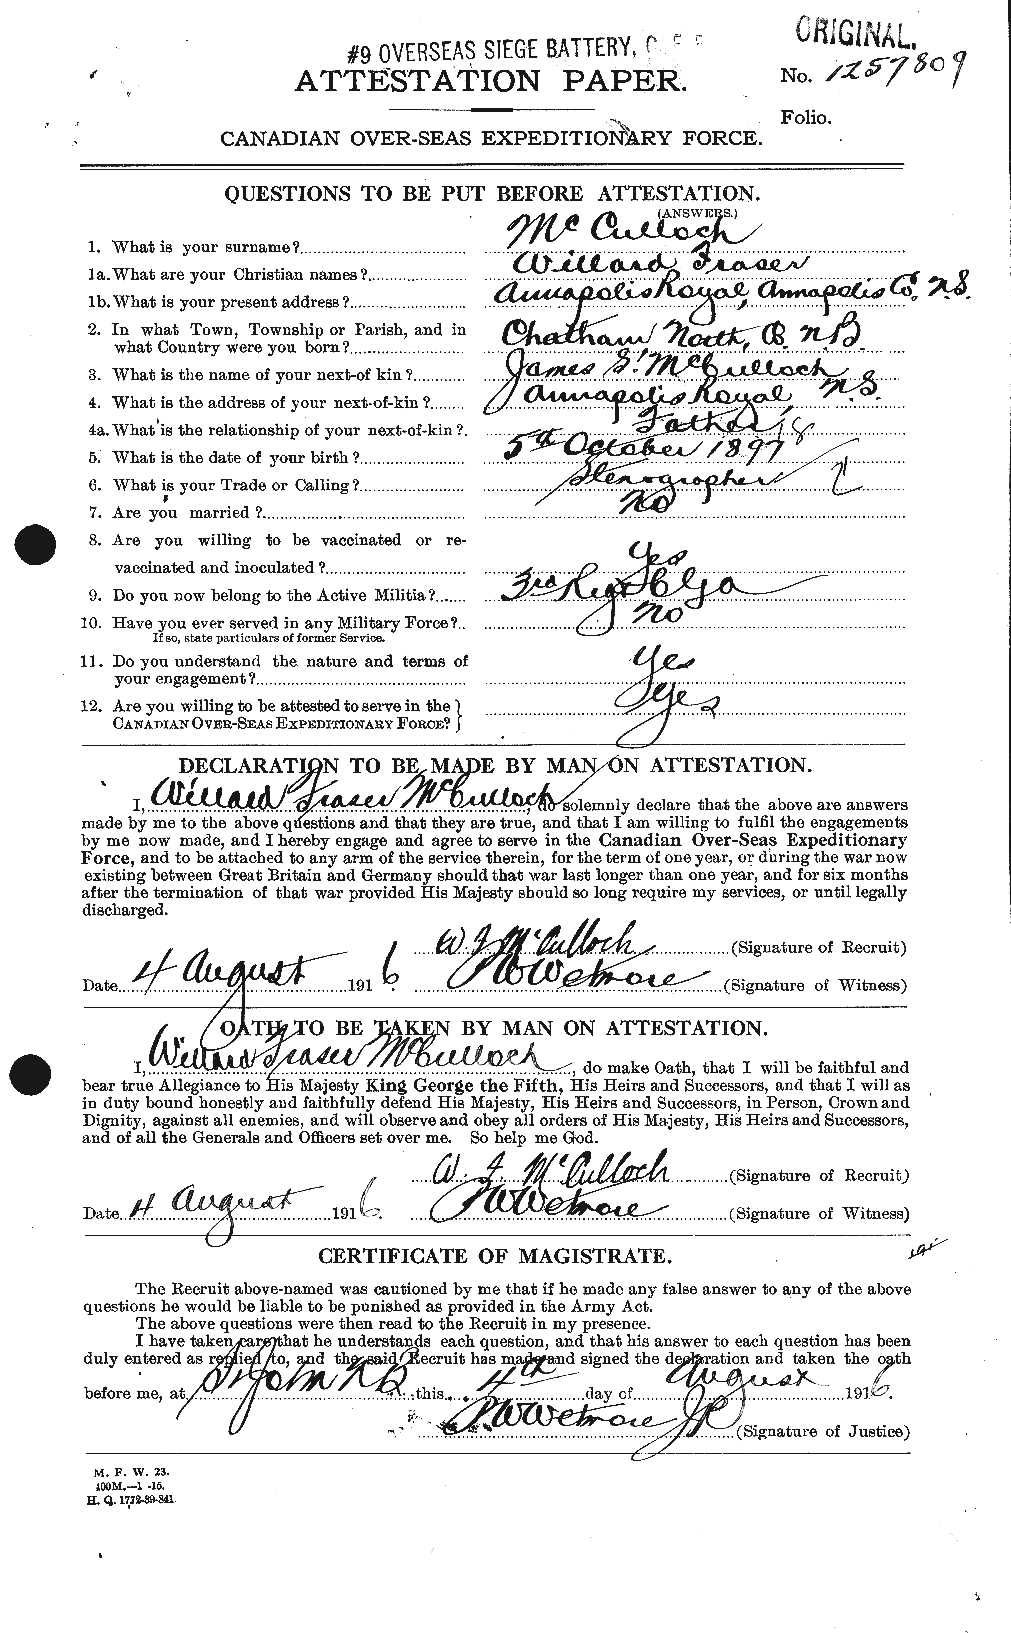 Personnel Records of the First World War - CEF 135157a